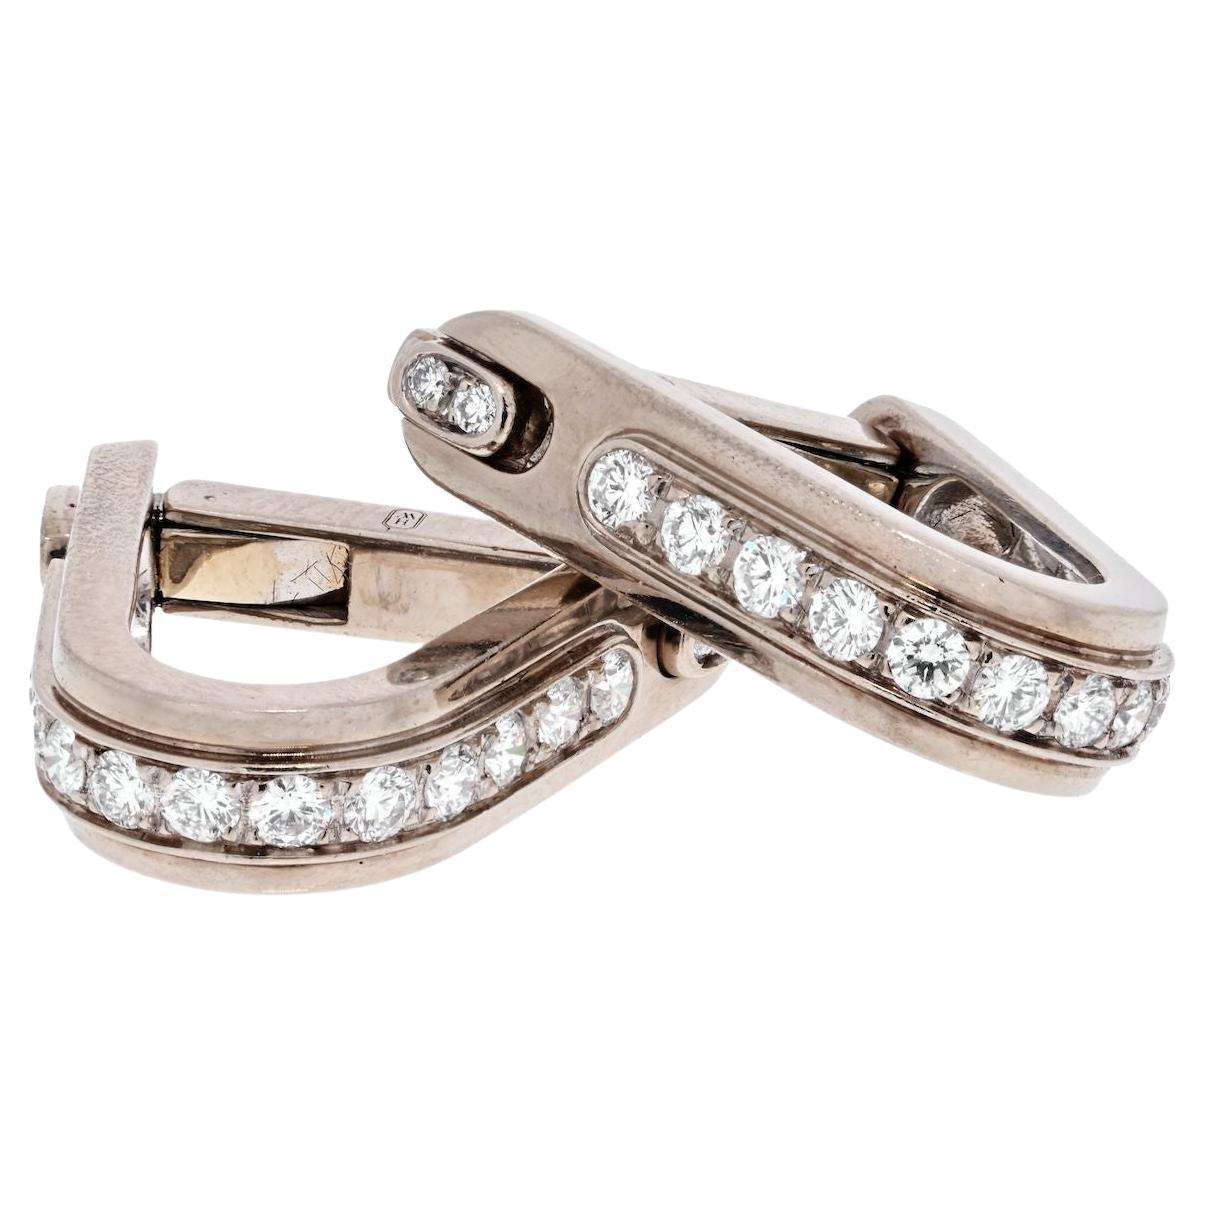 Harry Winston Diamonds & 18k White Gold Stirrup Arched Wraparound Cufflinks.
Harry Winston cufflinks are designed for the sartorialist. The arched shaped wraparound style cufflinks are made in 18k white gold and accented by 34 pave set diamonds